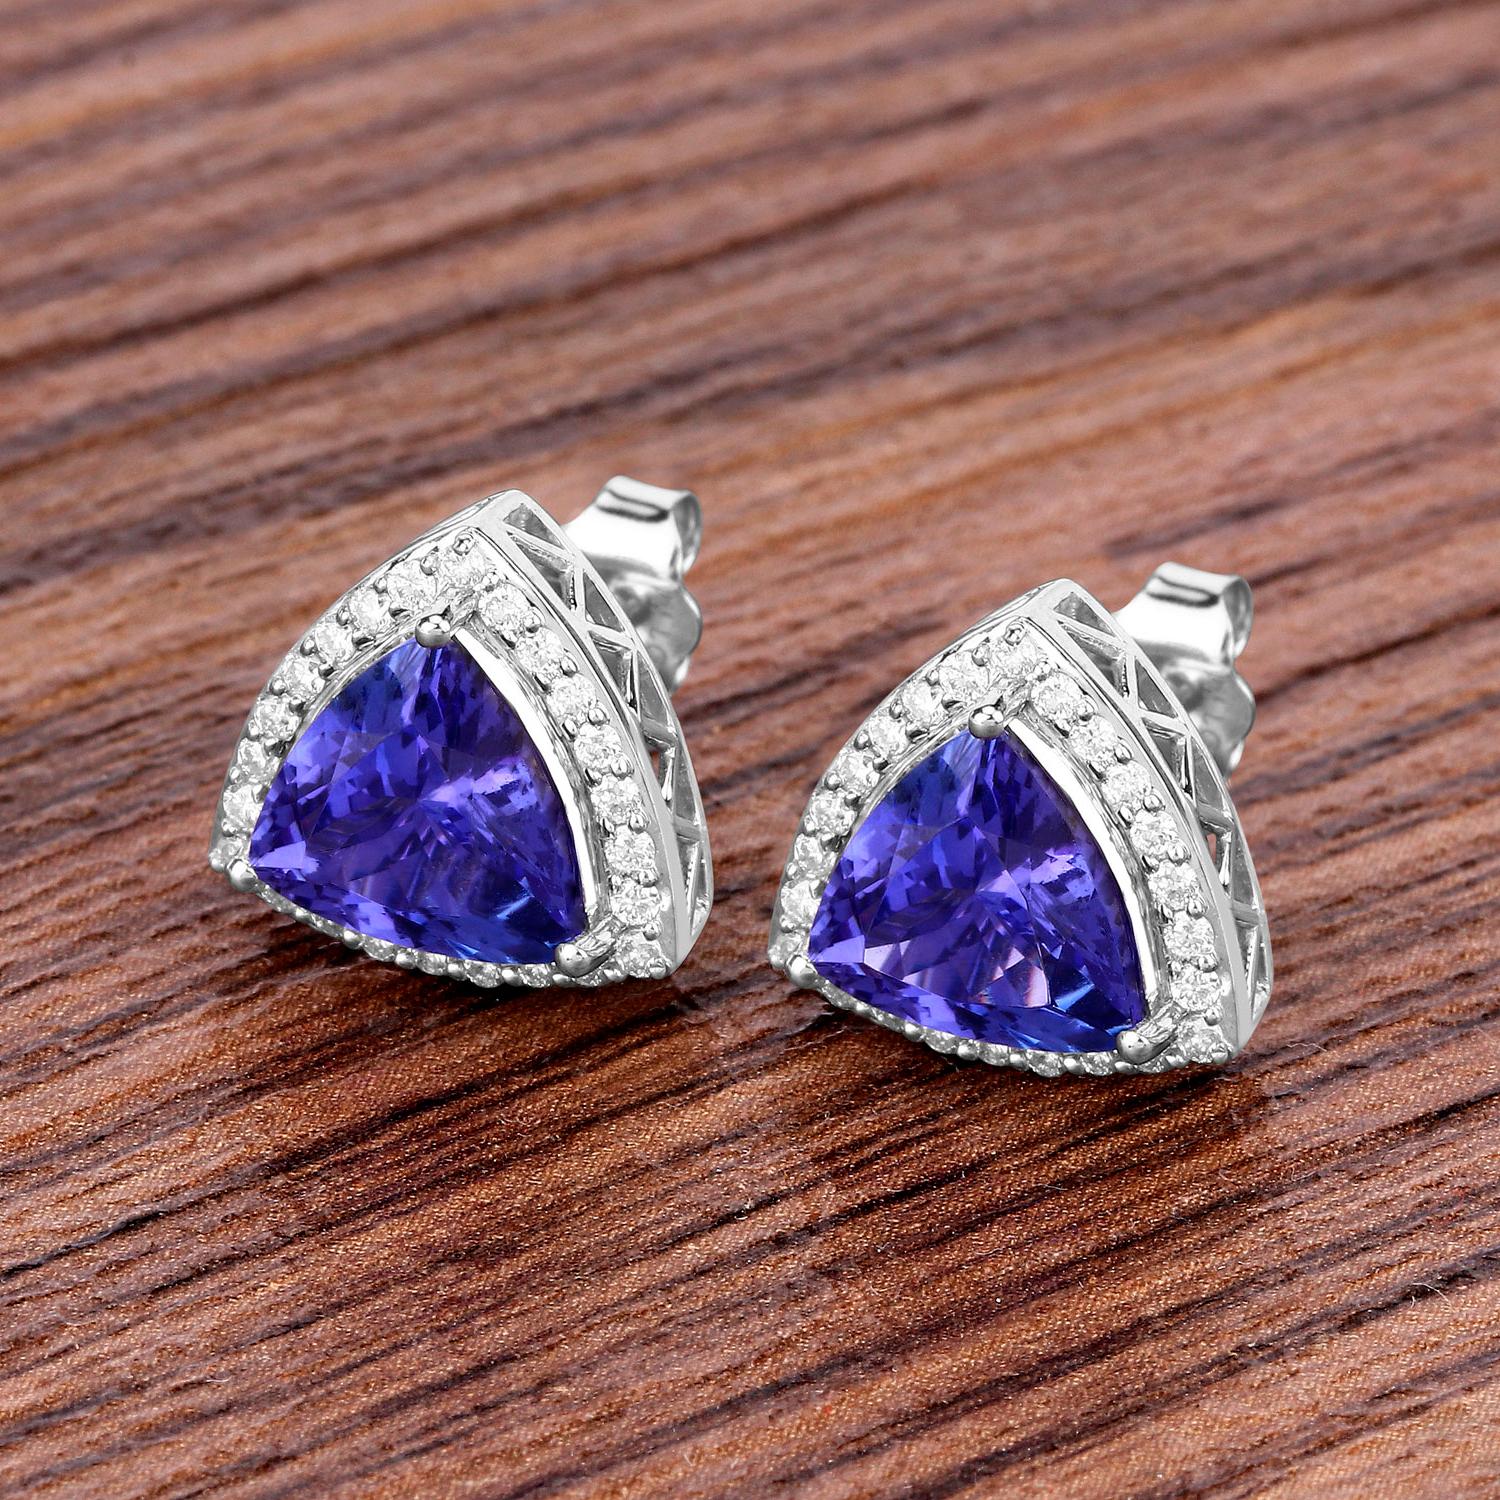 Trillion Cut Tanzanite Stud Earrings With Diamonds 4.62 Carats 14K White Gold For Sale